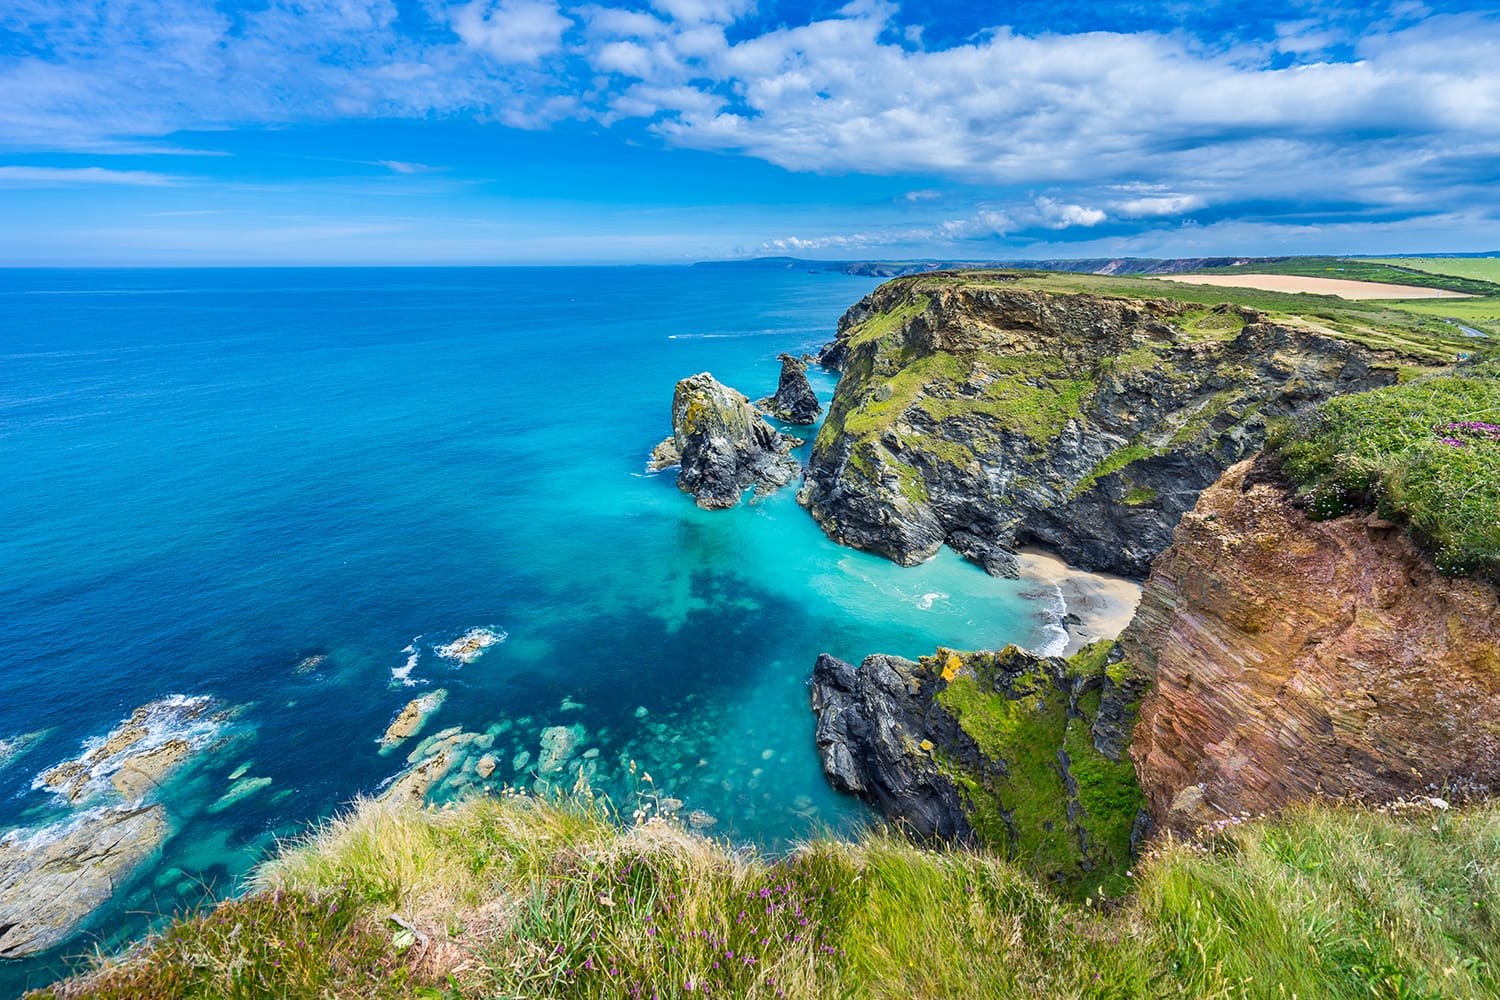 View of the South Devon coast, England, in the summer with clear waters, blue sky and grass.